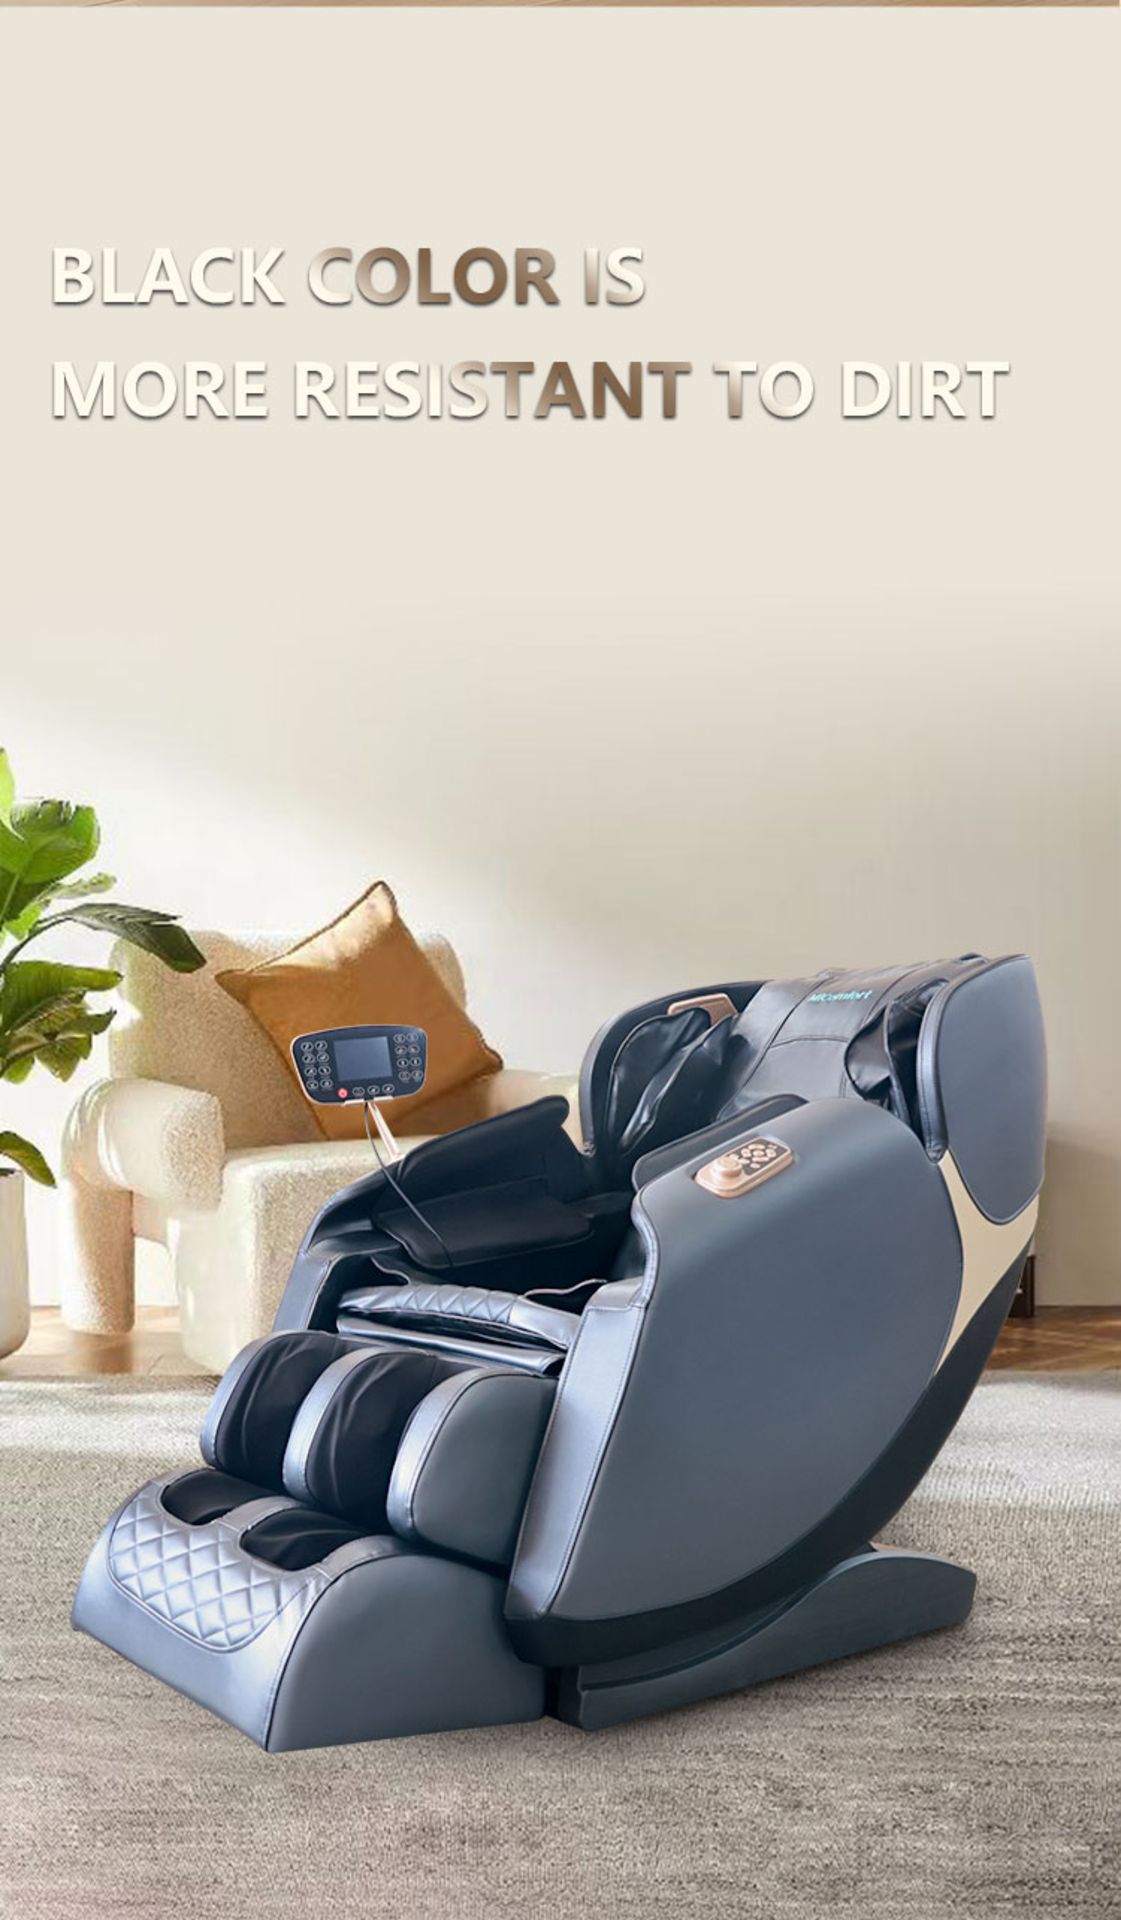 Brand New in Box Orchid Blue/Black MiComfort Full Body Massage Chair RRP £2199 *NO VAT* - Image 2 of 13